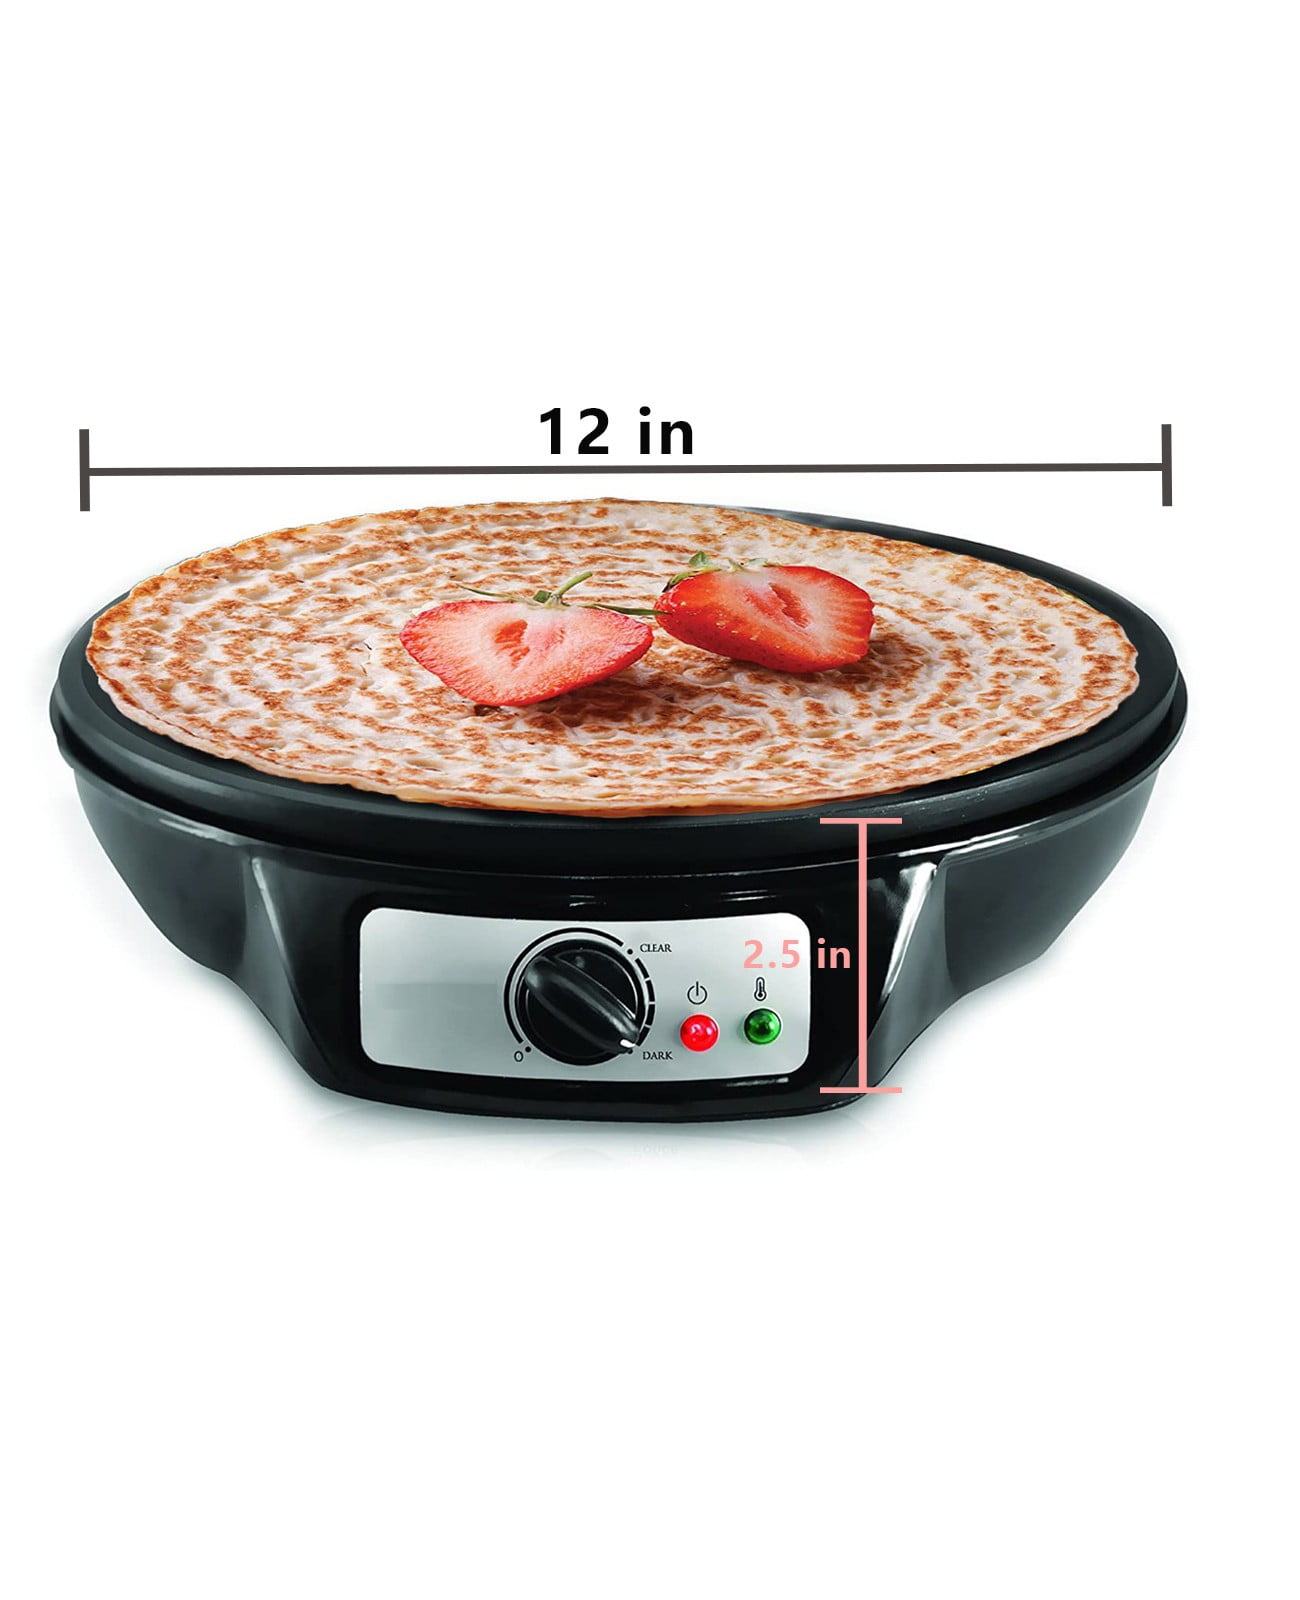 RFSTGYU Crepe Maker & Omelette Pan, Electric Griddle - Non-stick